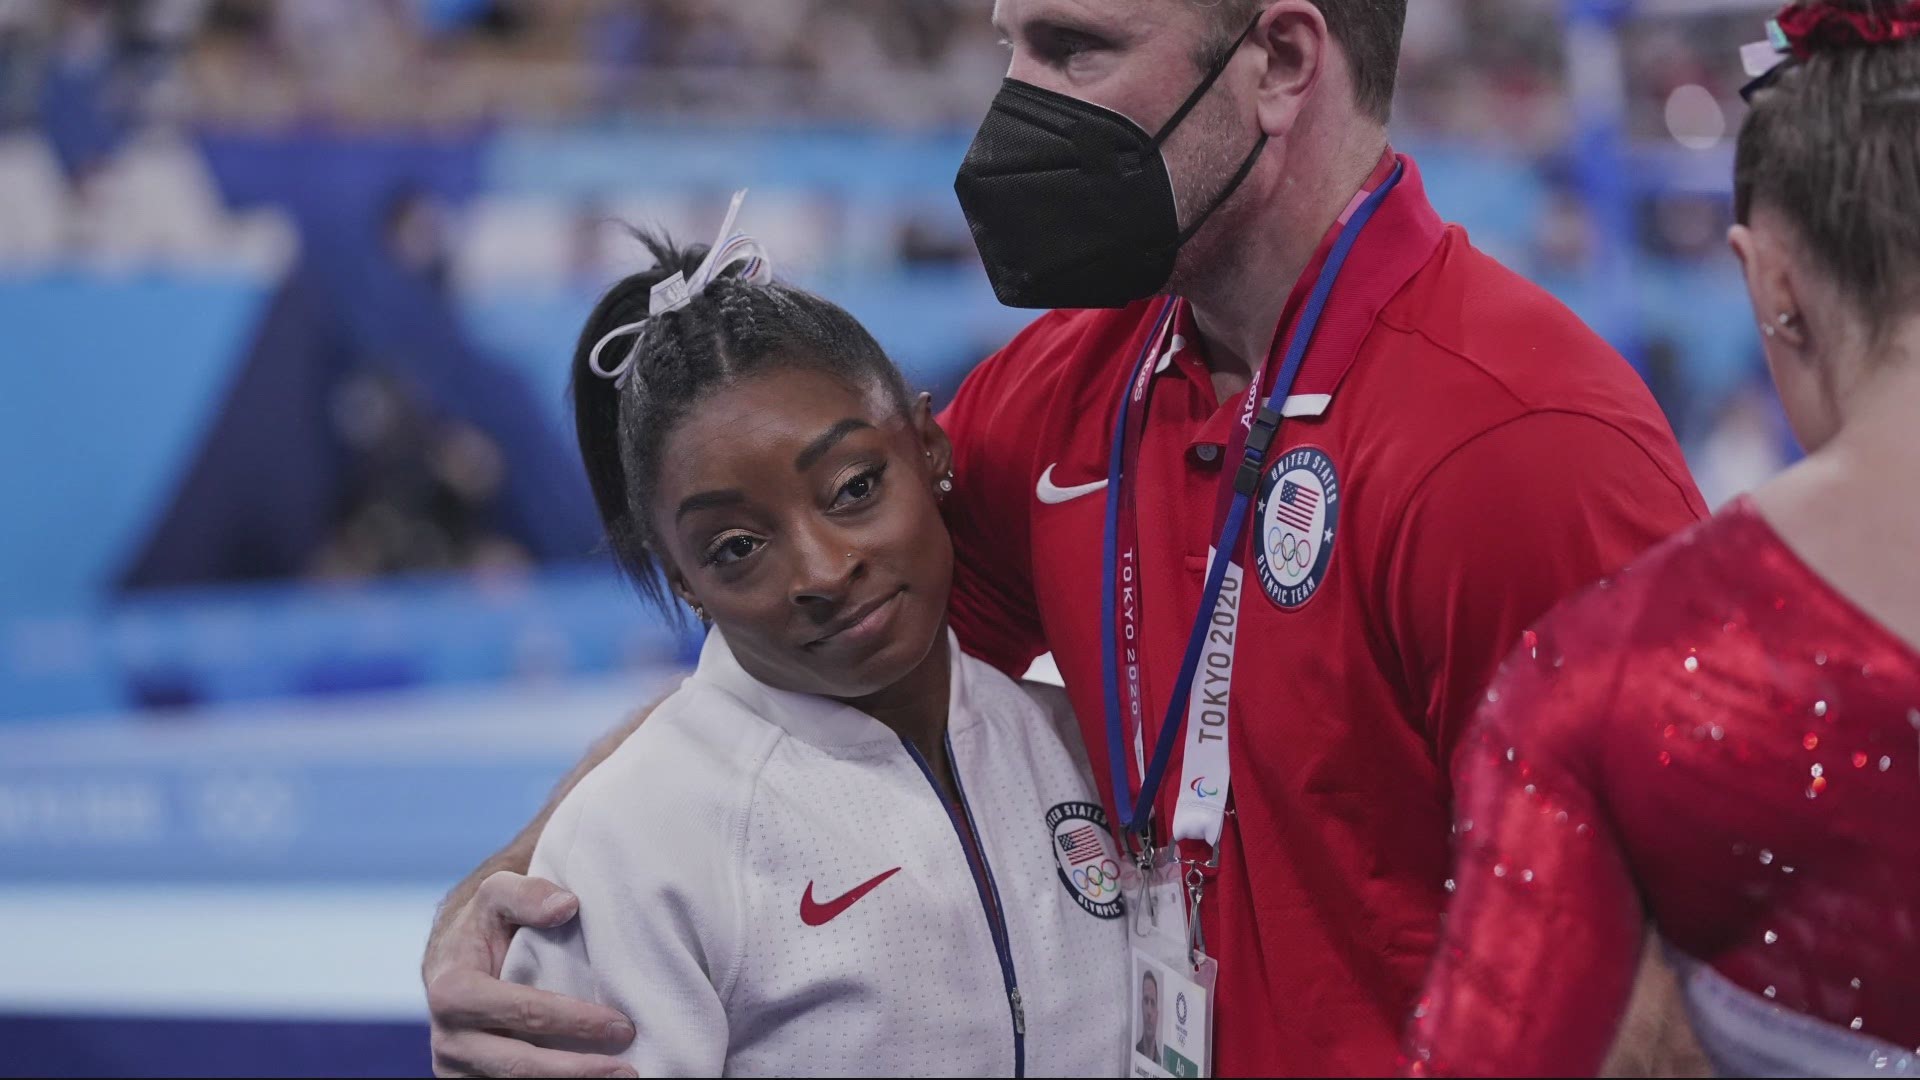 Simone Biles pulled out of the Tokyo Games, citing her mental health as the reason. Morgan Romero explains why advocates are calling Biles brave.